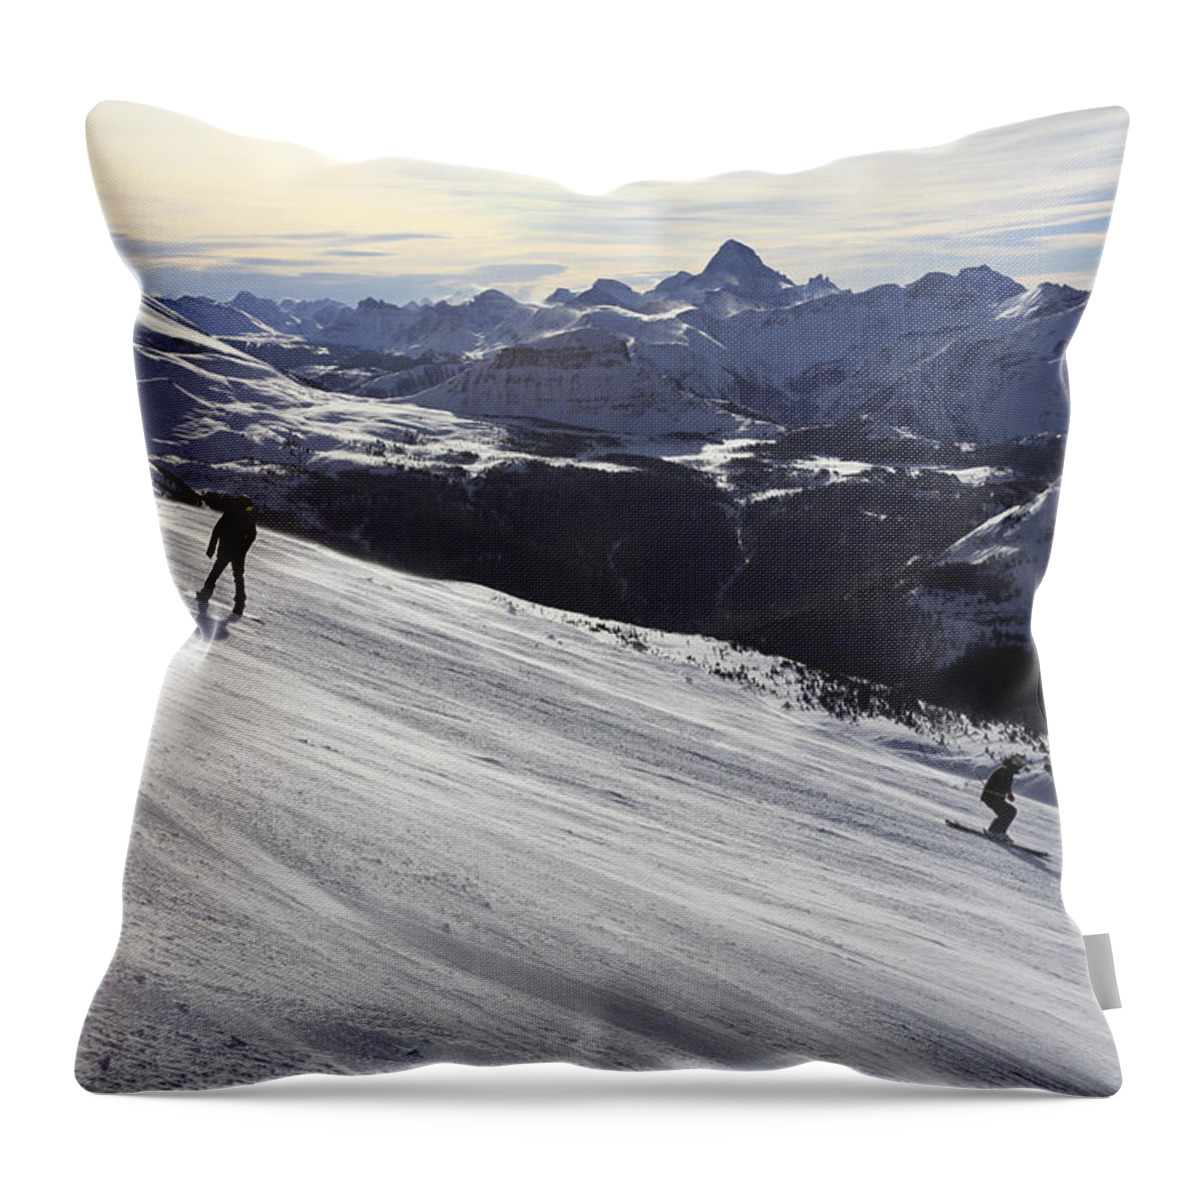 Skiing Throw Pillow featuring the photograph Skiers On Alpine Ski Slope by Bruce Yuanyue Bi